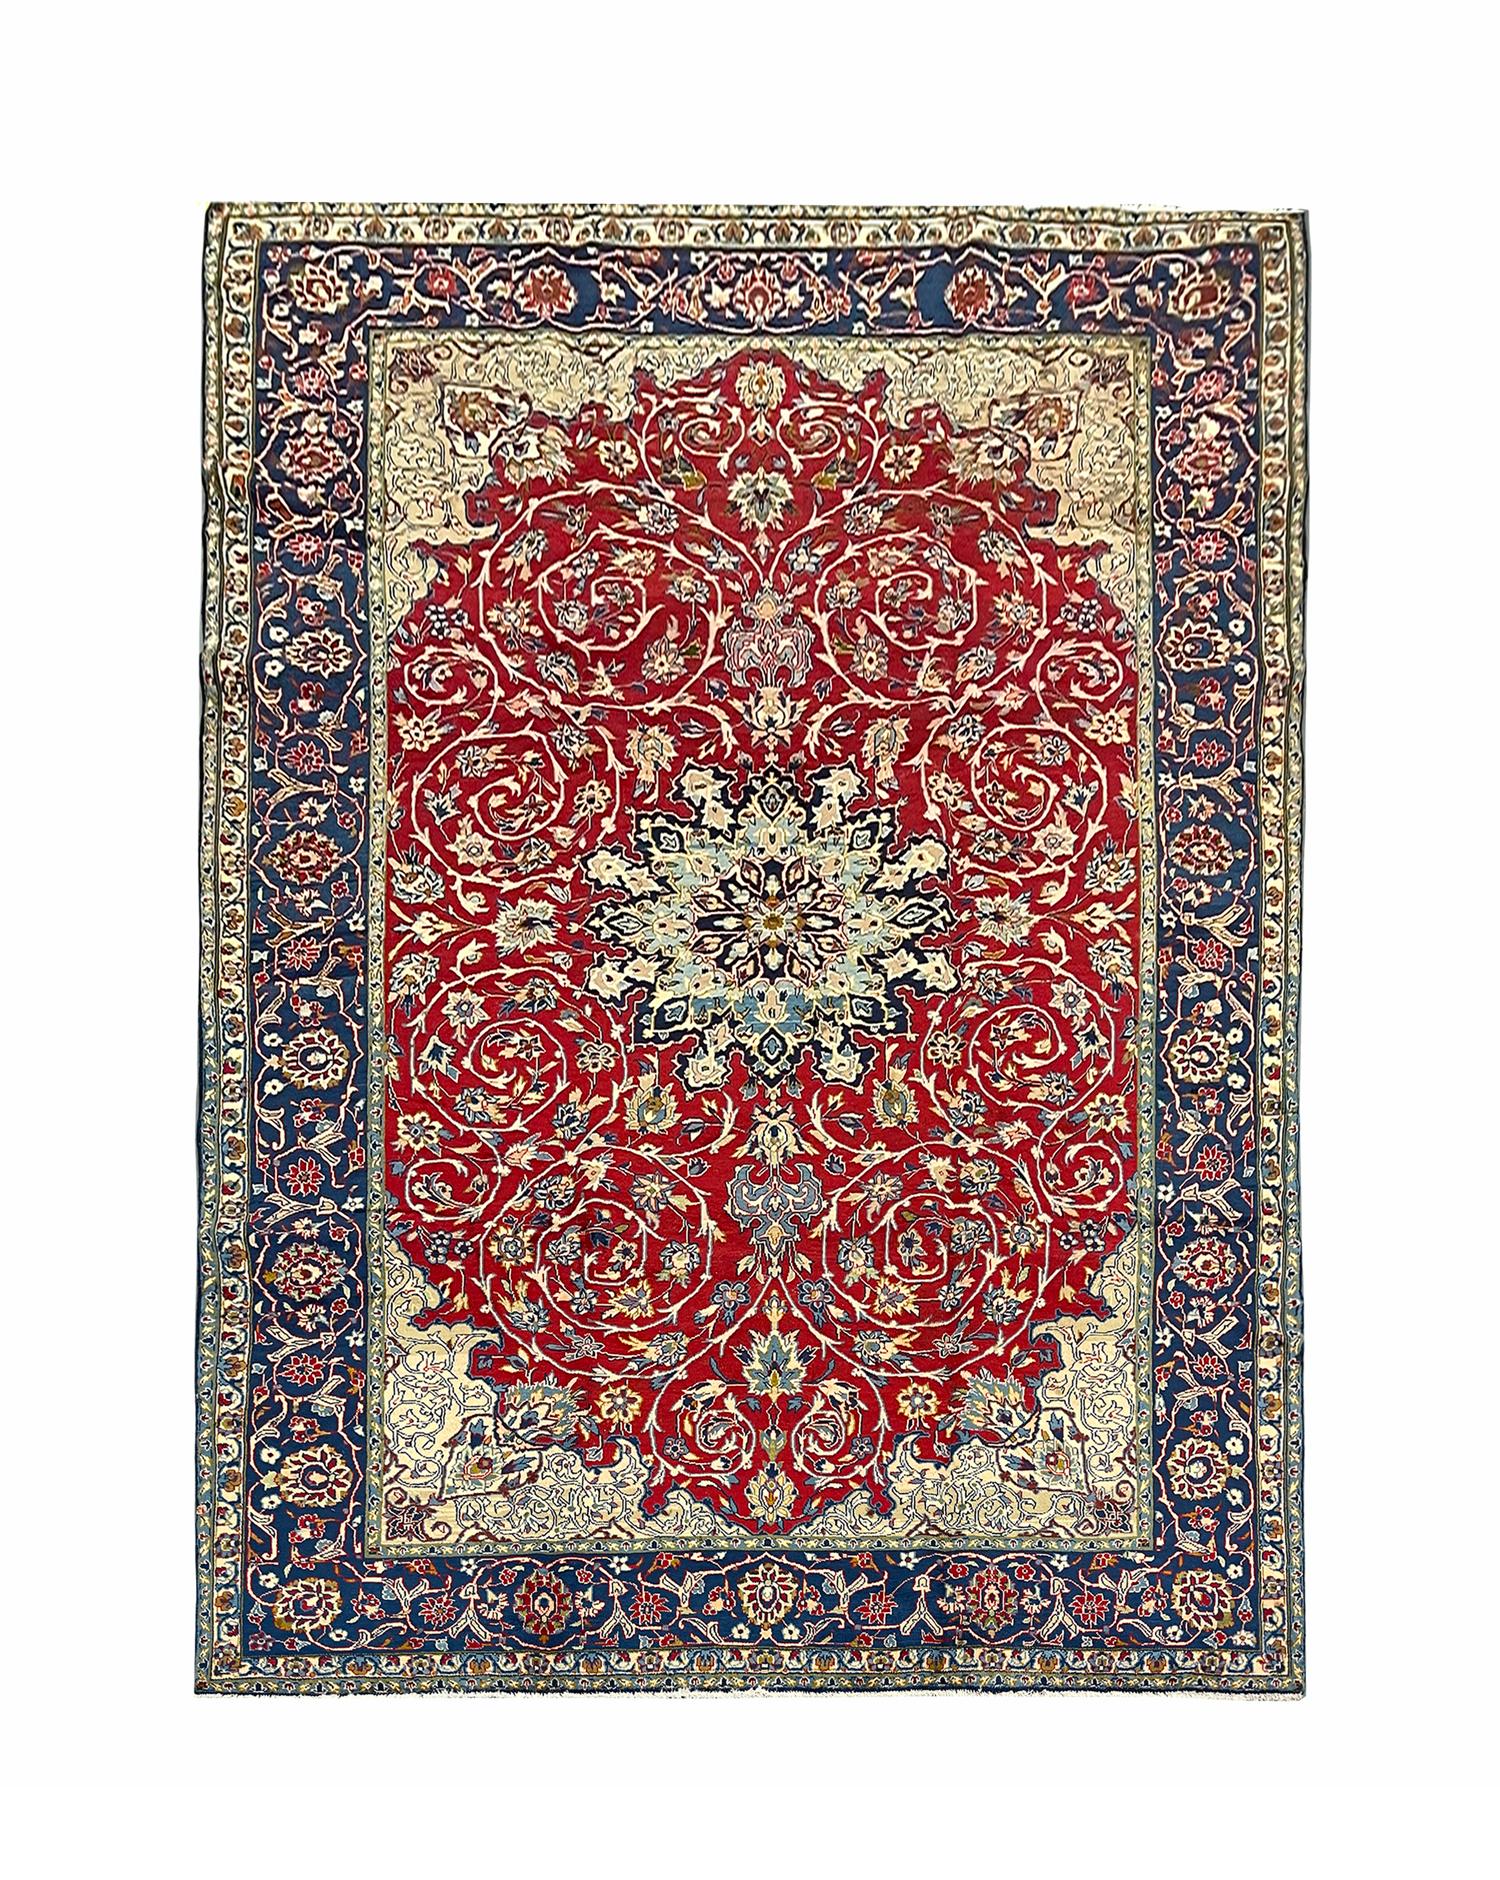 This elegant, rich red rug features a highly-detailed all over and surrounding design. It is decorated with a beautiful array of floral motifs woven symmetrically to create a decorative masterpiece. The enclosing border is woven on a contrasting